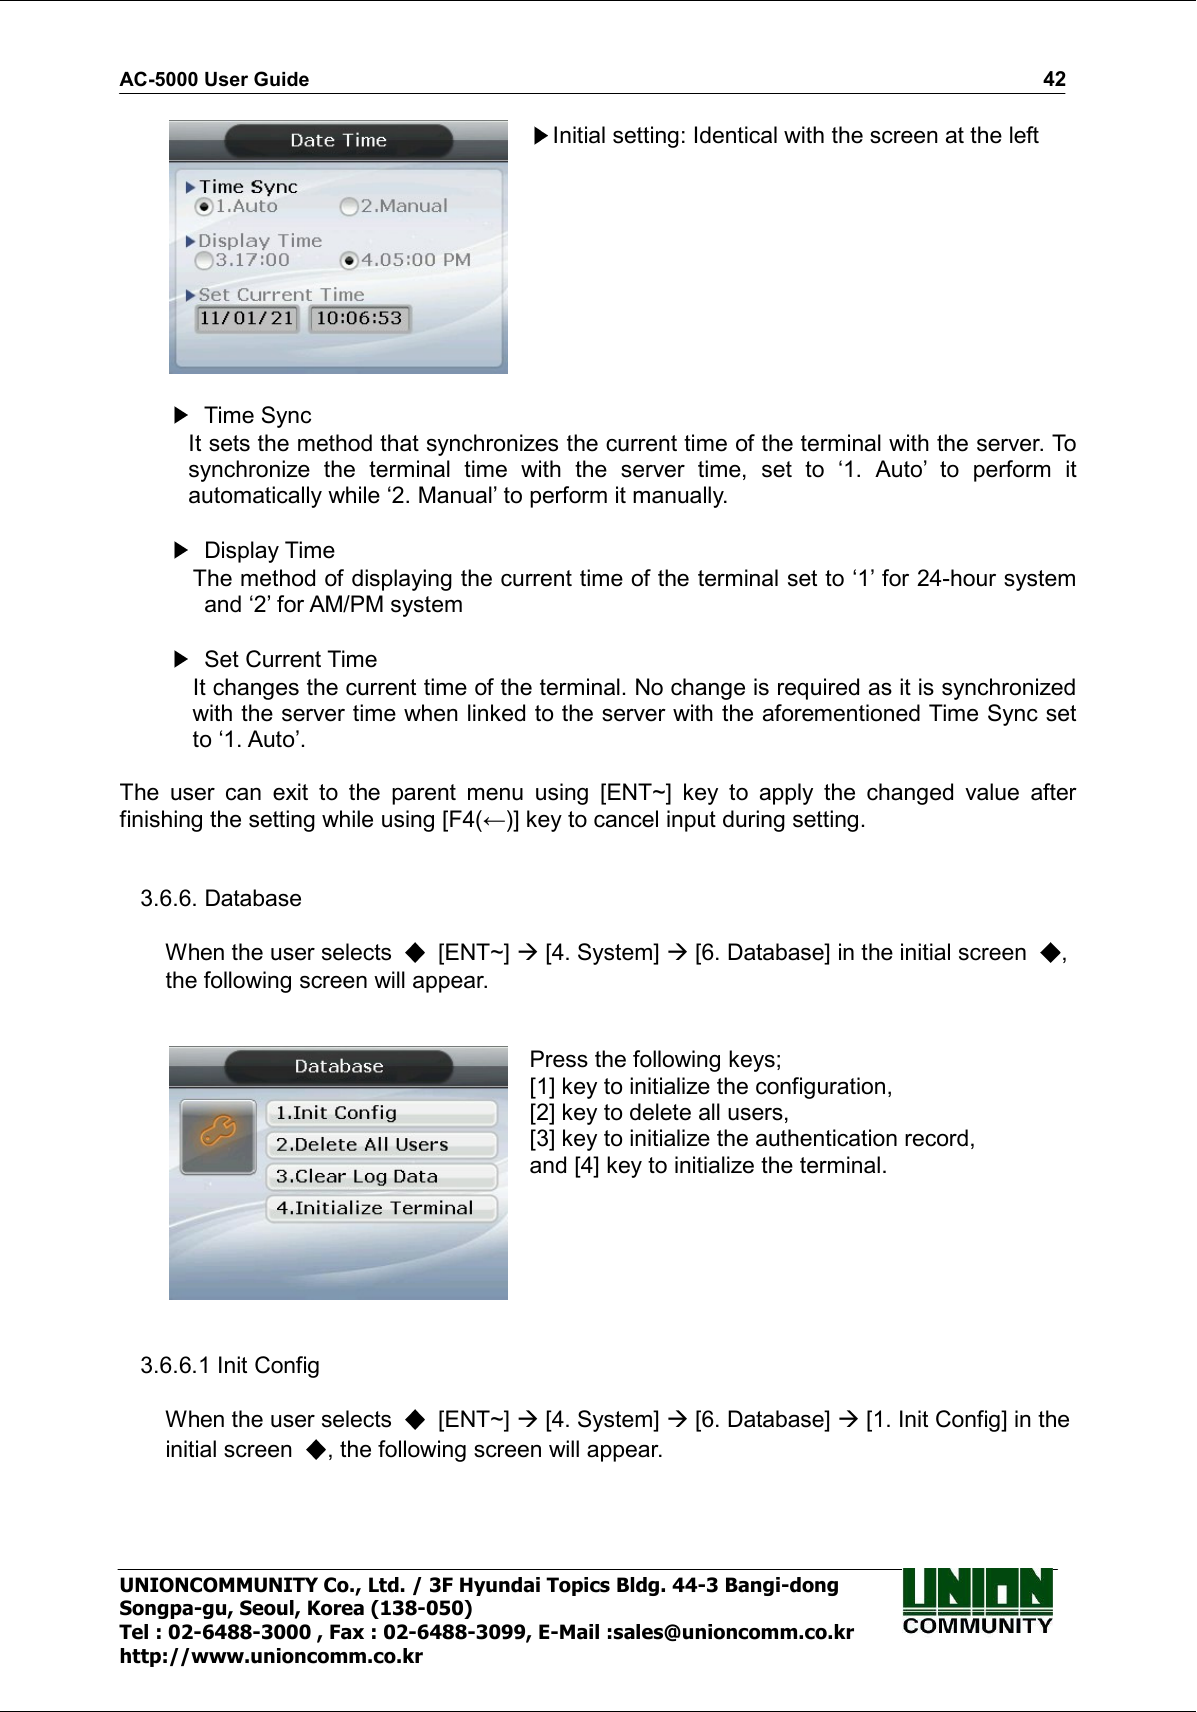 AC-5000 User Guide                                                                                                                                                   42 UNIONCOMMUNITY Co., Ltd. / 3F Hyundai Topics Bldg. 44-3 Bangi-dong Songpa-gu, Seoul, Korea (138-050) Tel : 02-6488-3000 , Fax : 02-6488-3099, E-Mail :sales@unioncomm.co.kr http://www.unioncomm.co.kr  Initial setting: Identical with the screen at the left     Time Sync It sets the method that synchronizes the current time of the terminal with the server. To synchronize  the  terminal  time  with  the  server  time,  set  to  ‘1.  Auto’  to  perform  it automatically while ‘2. Manual’ to perform it manually.    Display Time     The method of displaying the current time of the terminal set to ‘1’ for 24-hour system and ‘2’ for AM/PM system    Set Current Time     It changes the current time of the terminal. No change is required as it is synchronized with the server time when linked to the server with the aforementioned Time Sync set to ‘1. Auto’.         The  user  can  exit  to  the  parent  menu  using  [ENT~]  key  to  apply  the  changed  value  after finishing the setting while using [F4(←)] key to cancel input during setting.   3.6.6. Database  When the user selects    [ENT~]  [4. System]  [6. Database] in the initial screen  , the following screen will appear.    Press the following keys; [1] key to initialize the configuration, [2] key to delete all users, [3] key to initialize the authentication record, and [4] key to initialize the terminal.   3.6.6.1 Init Config  When the user selects    [ENT~]  [4. System]  [6. Database]  [1. Init Config] in the initial screen  , the following screen will appear.  